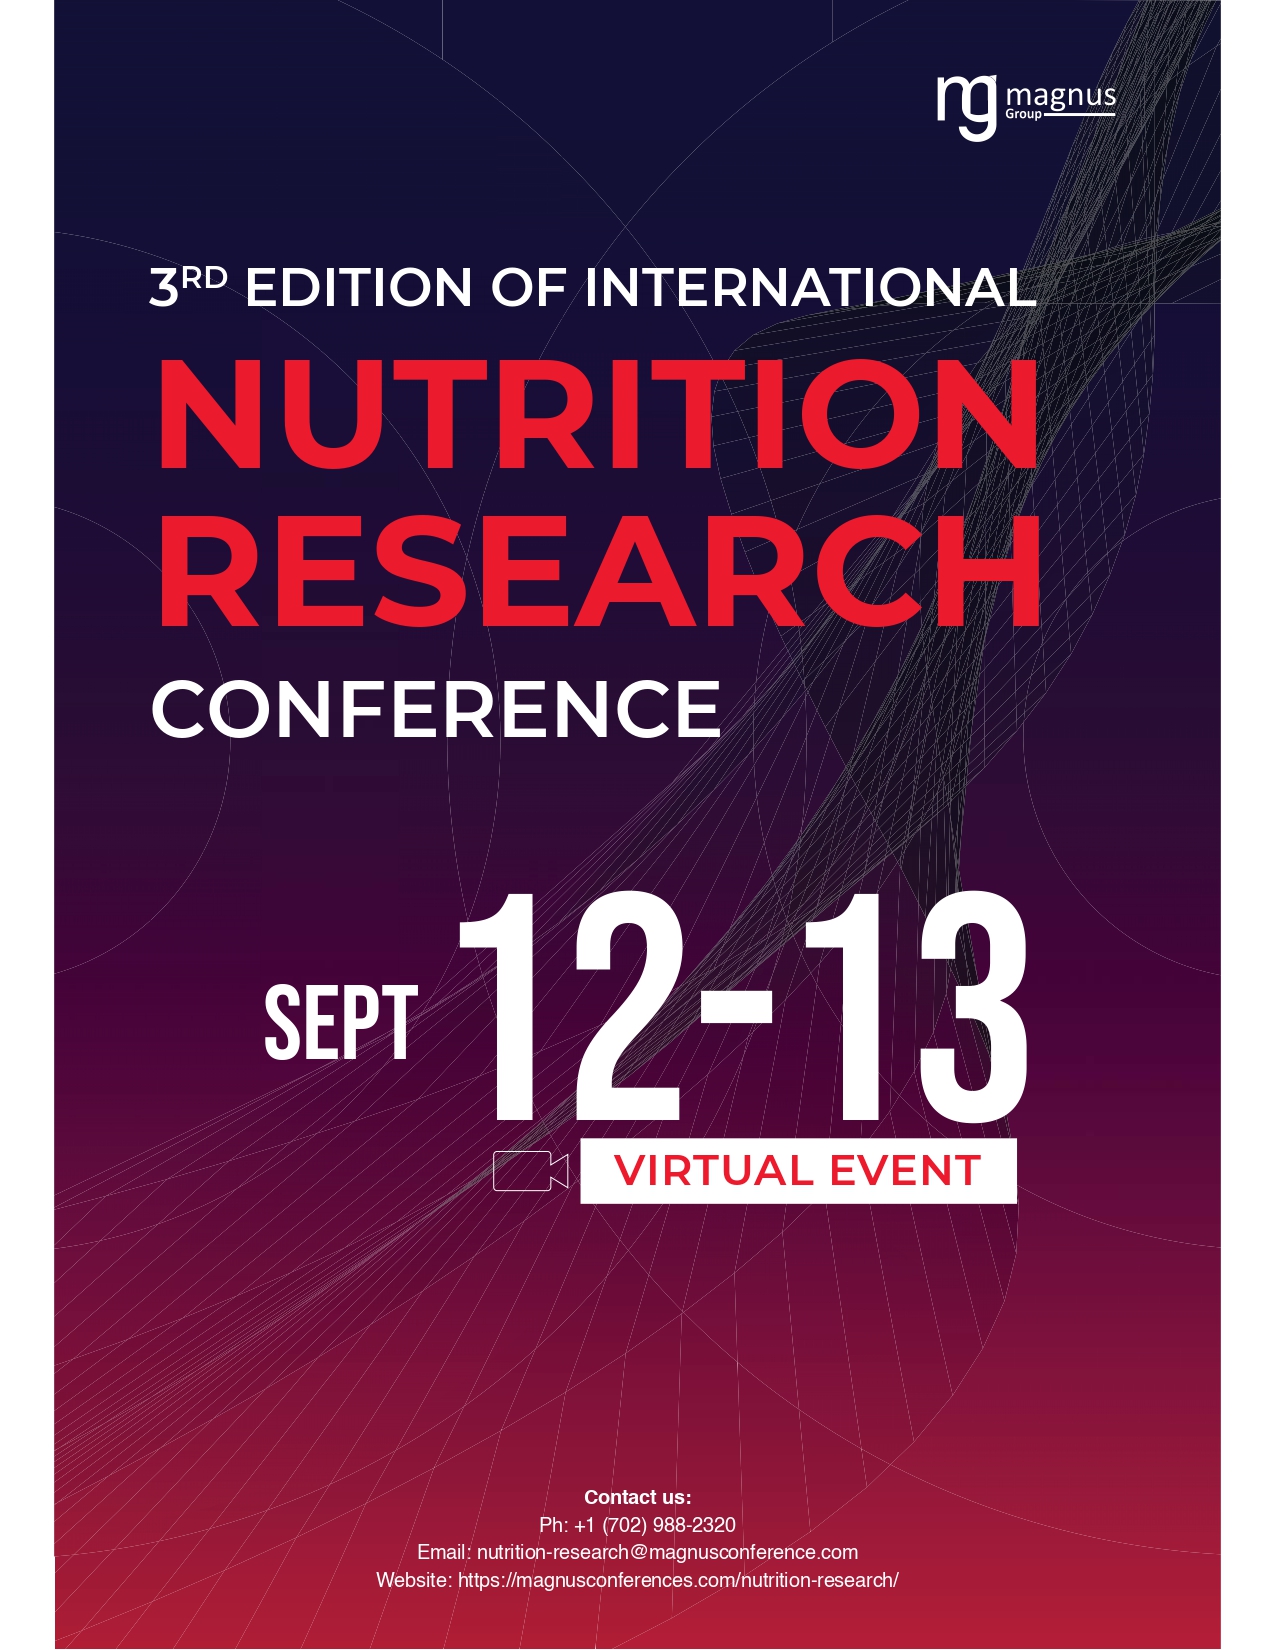 Nutrition Research Conference | Online Event Event Book